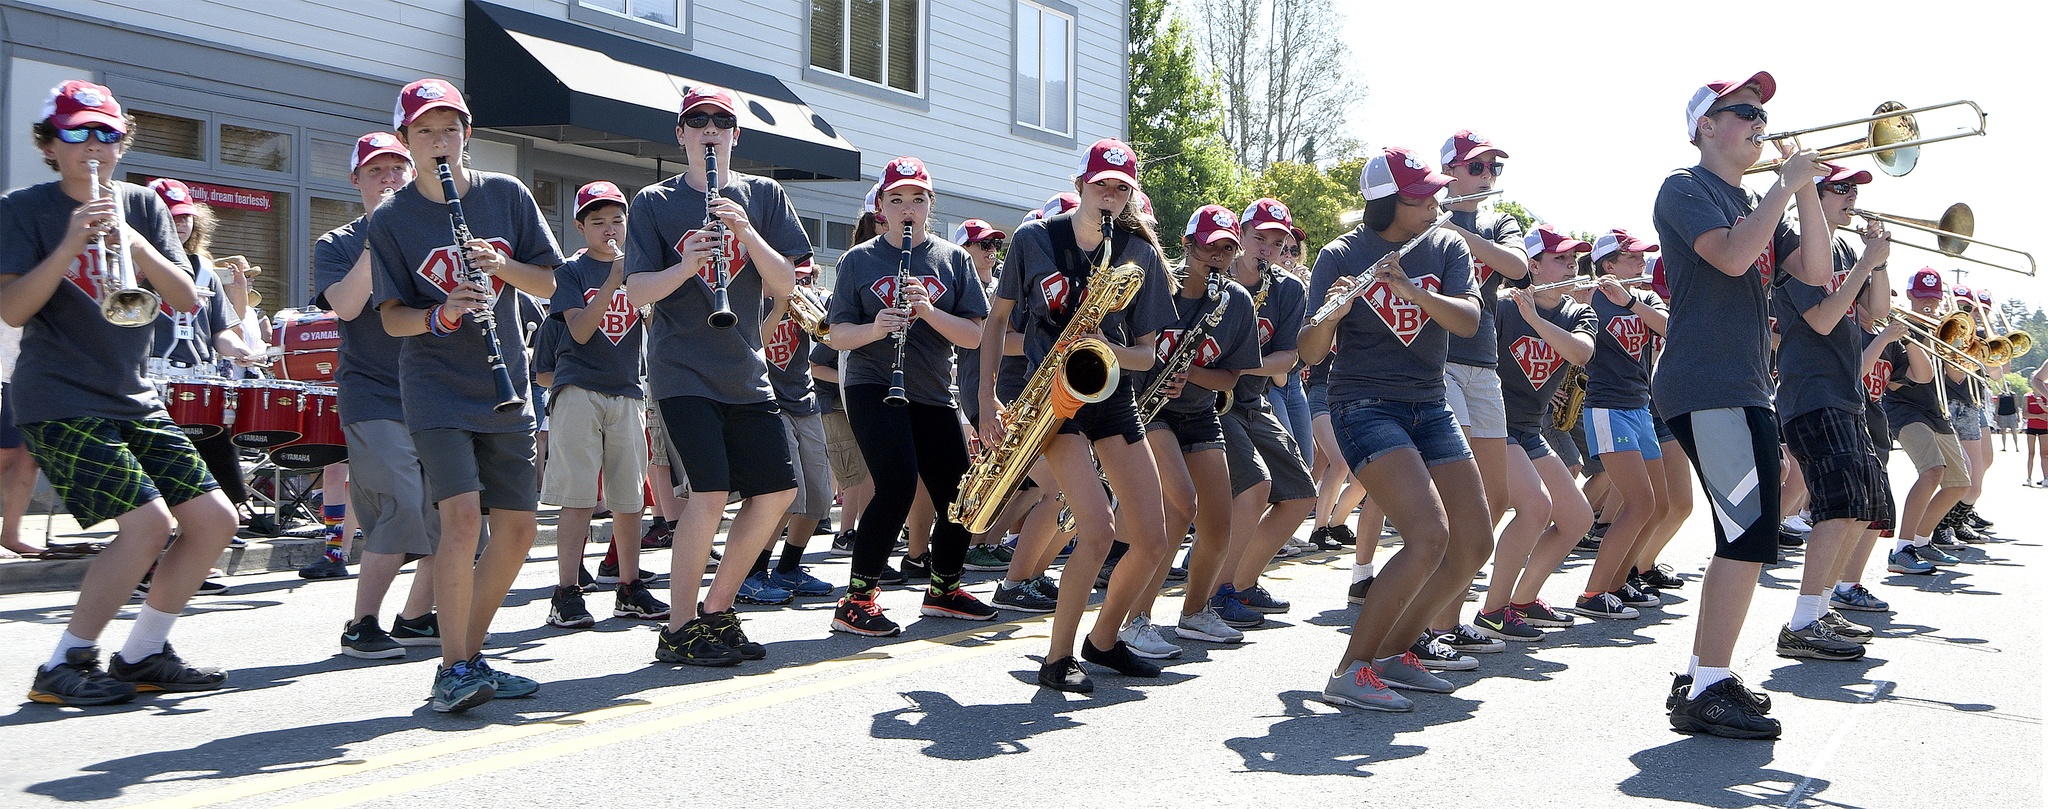 Members of the Snoqualmie Valley Youth Marching Band perform “Bang Bang” for the judges at the Railroad Days Grand Parade Saturday morning.